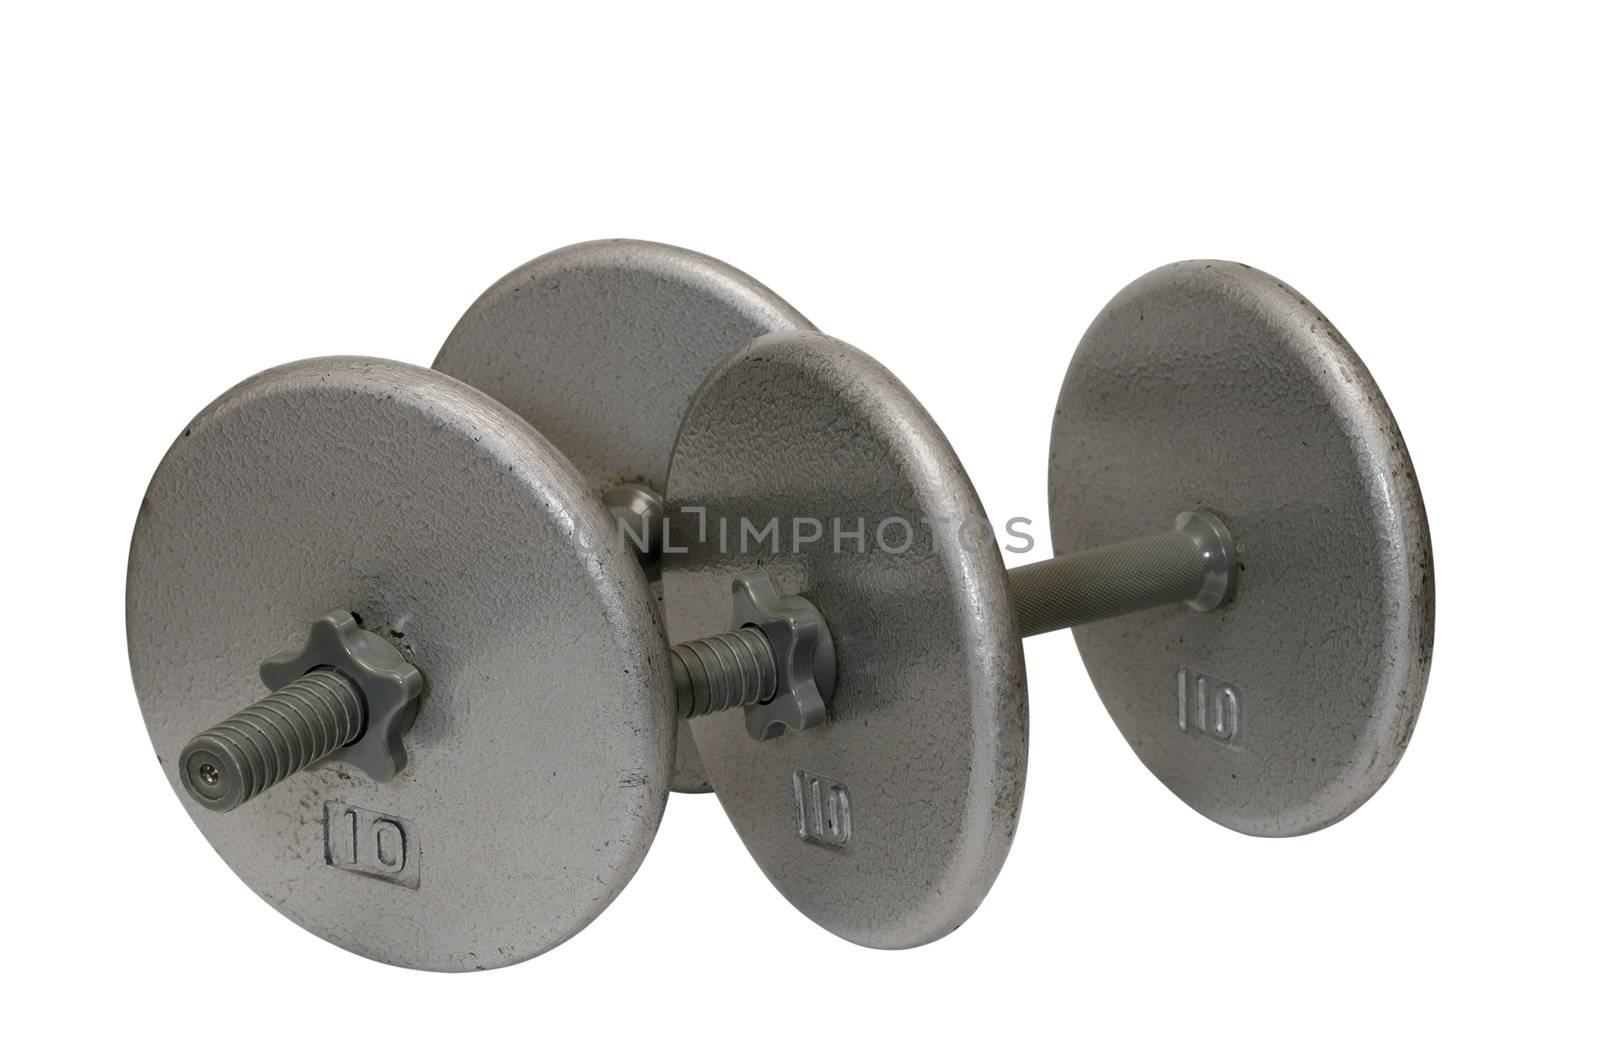 Two dumbbells isolated on white background with clipping path.